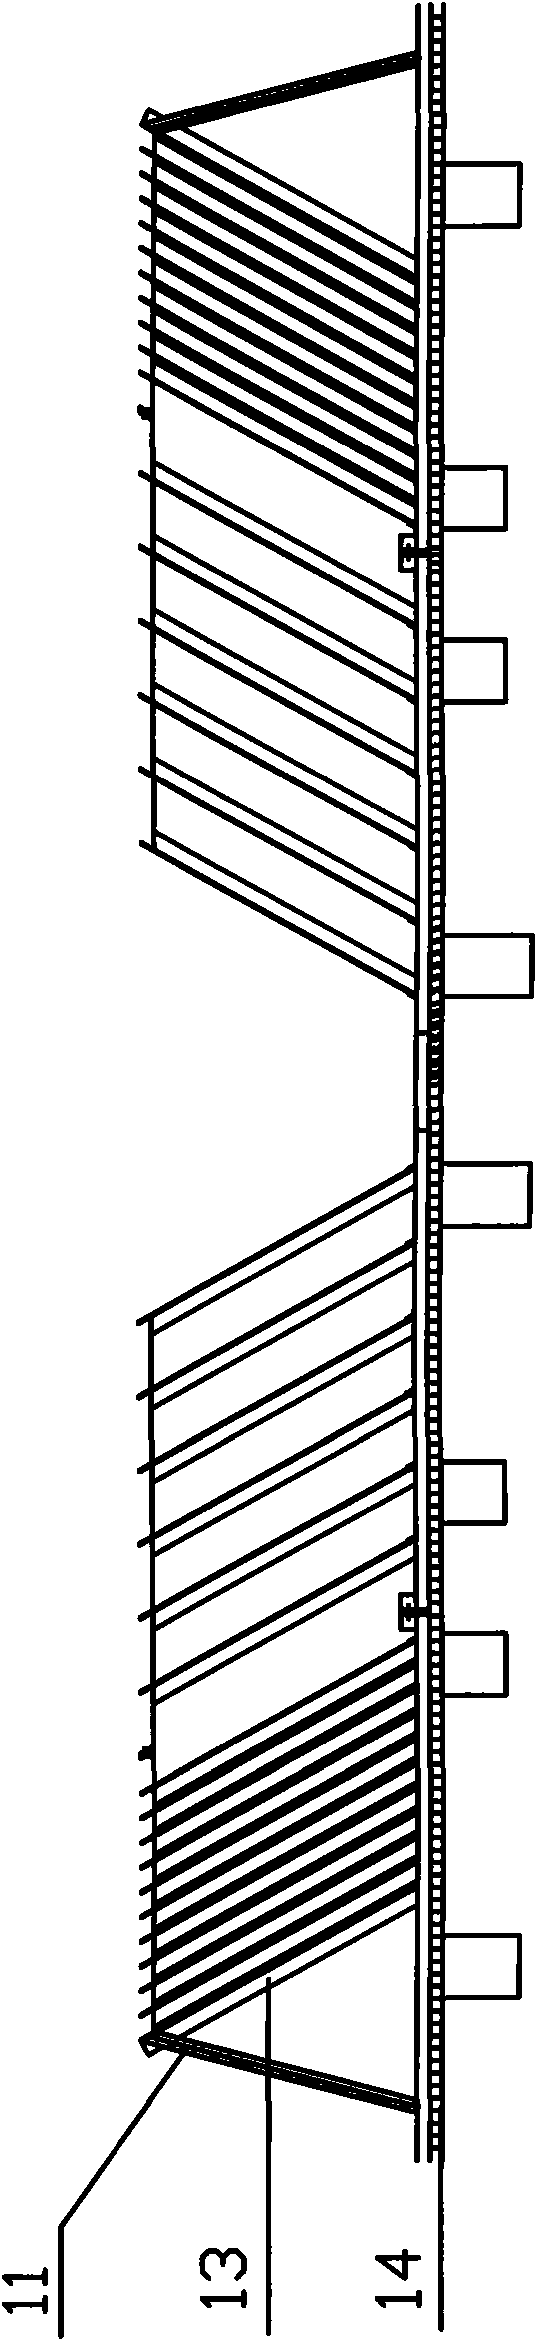 Inclined plate settling separating device